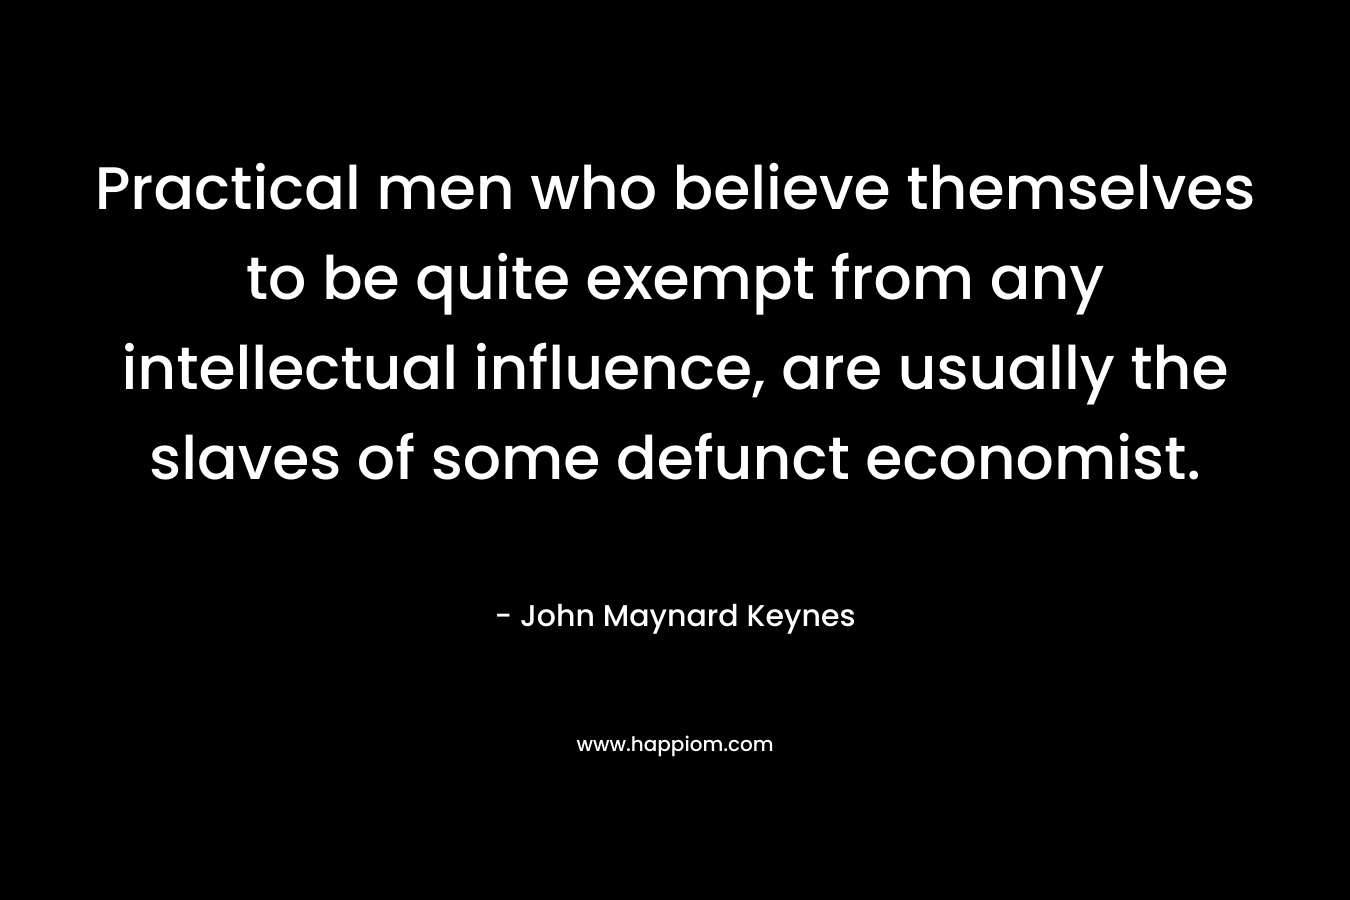 Practical men who believe themselves to be quite exempt from any intellectual influence, are usually the slaves of some defunct economist.